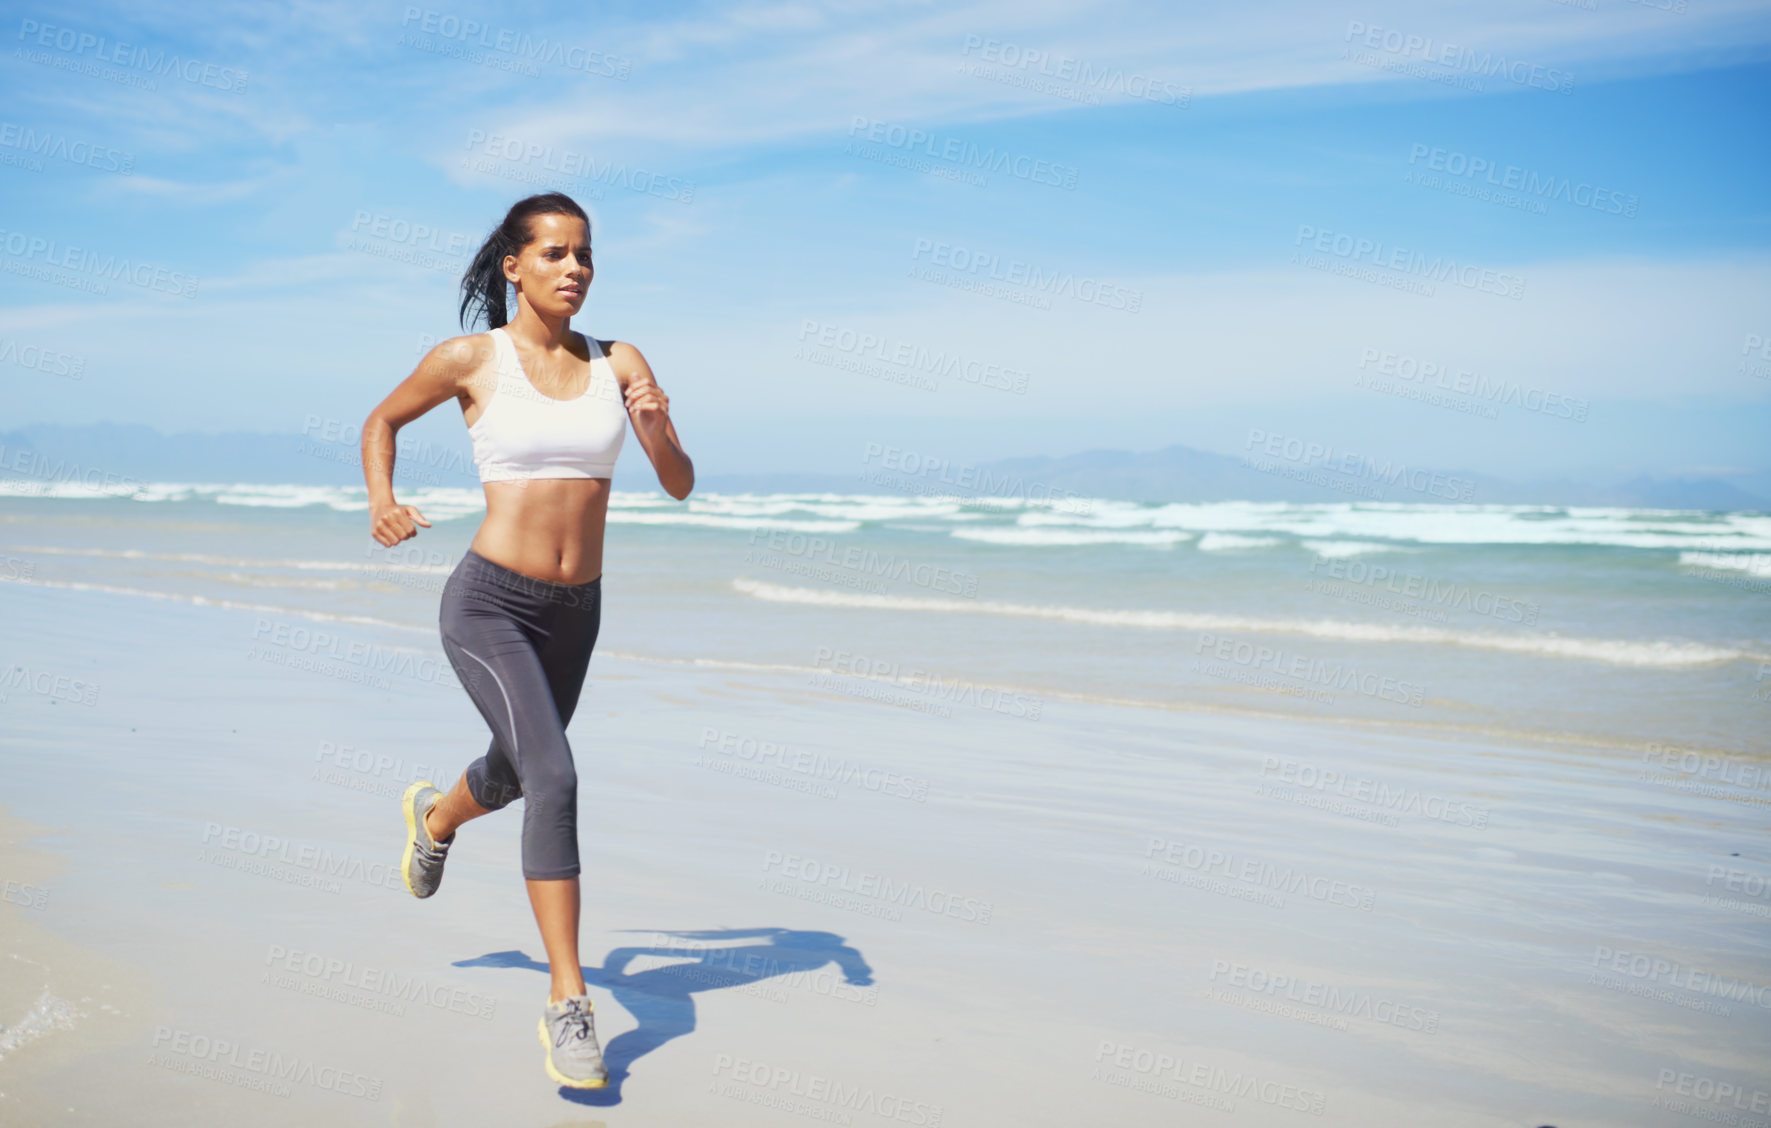 Buy stock photo Fitness, space or Indian woman at sea running for exercise, training or outdoor workout at beach. Sports person, runner or healthy female athlete on sand for cardio endurance, wellness or mockup 